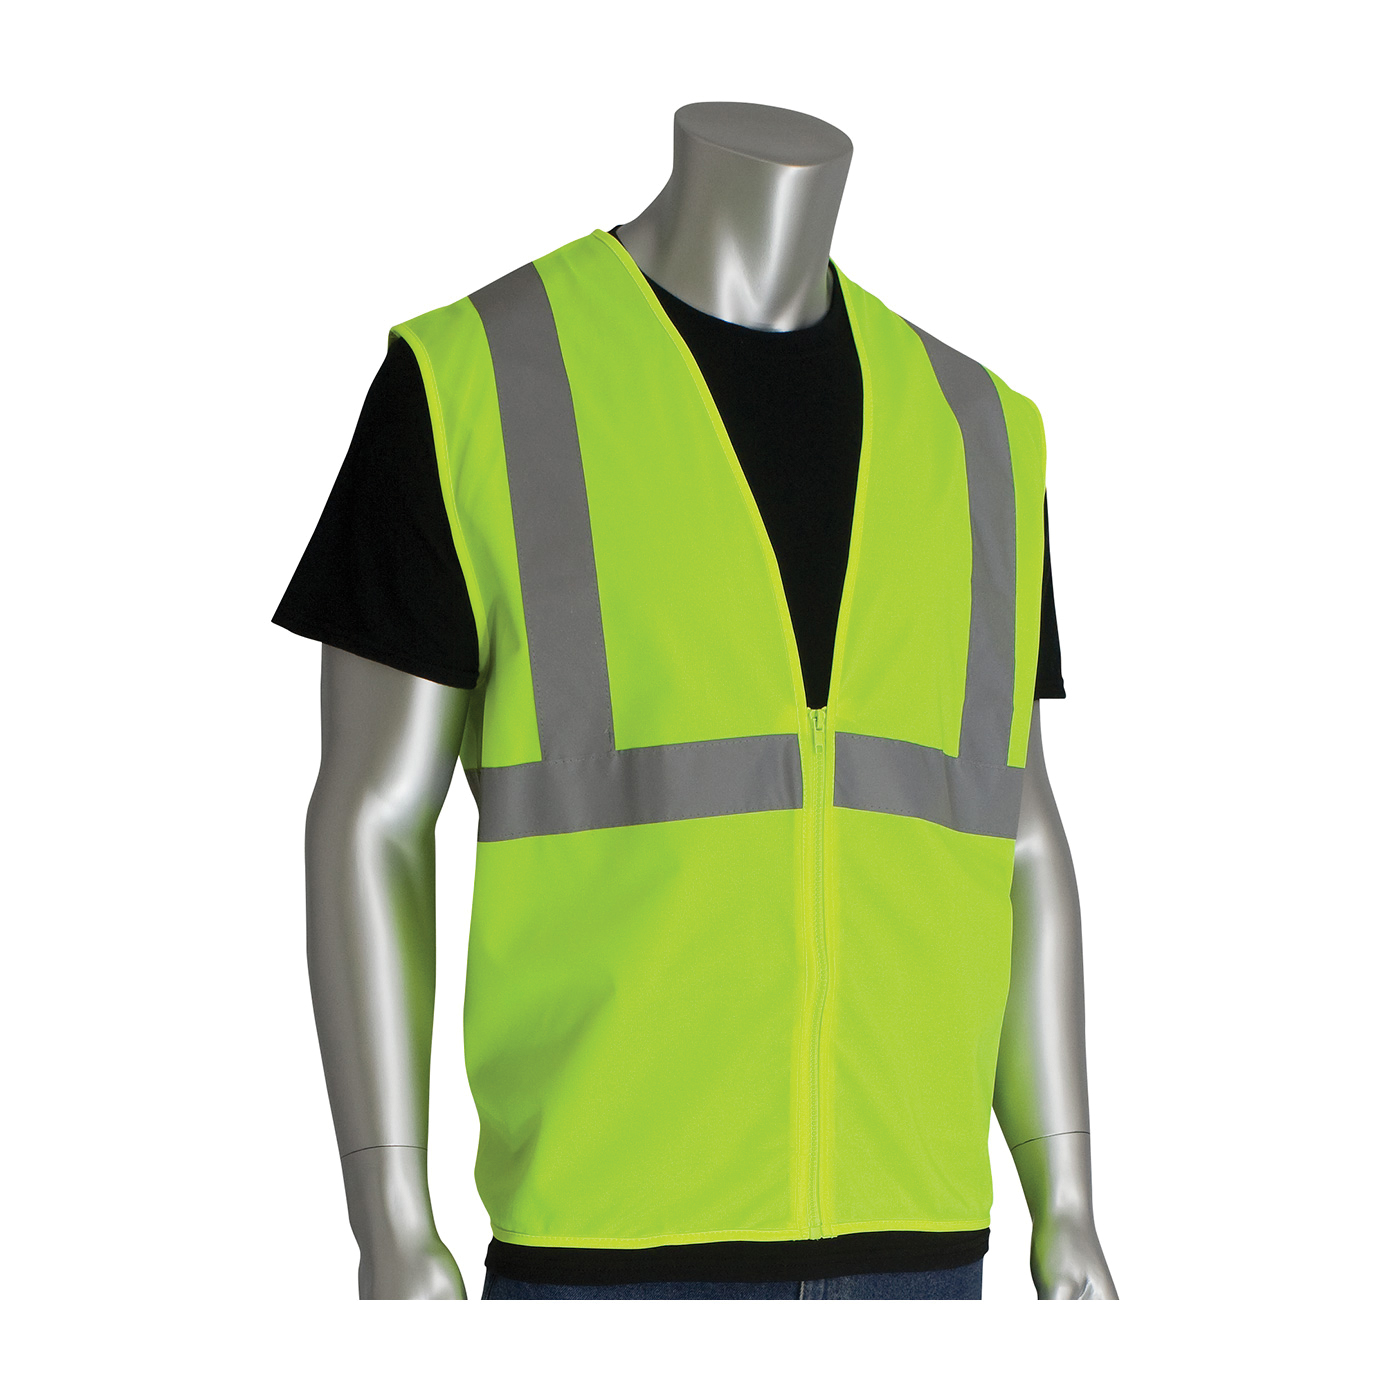 PIP® 302-WCENGZLY-4X Standard Solid Vest, 4XL, Hi-Viz Lime Yellow, Polyester Mesh, Zipper Closure, ANSI Class: Class 2, Specifications Met: ANSI 107 Type R Class 2